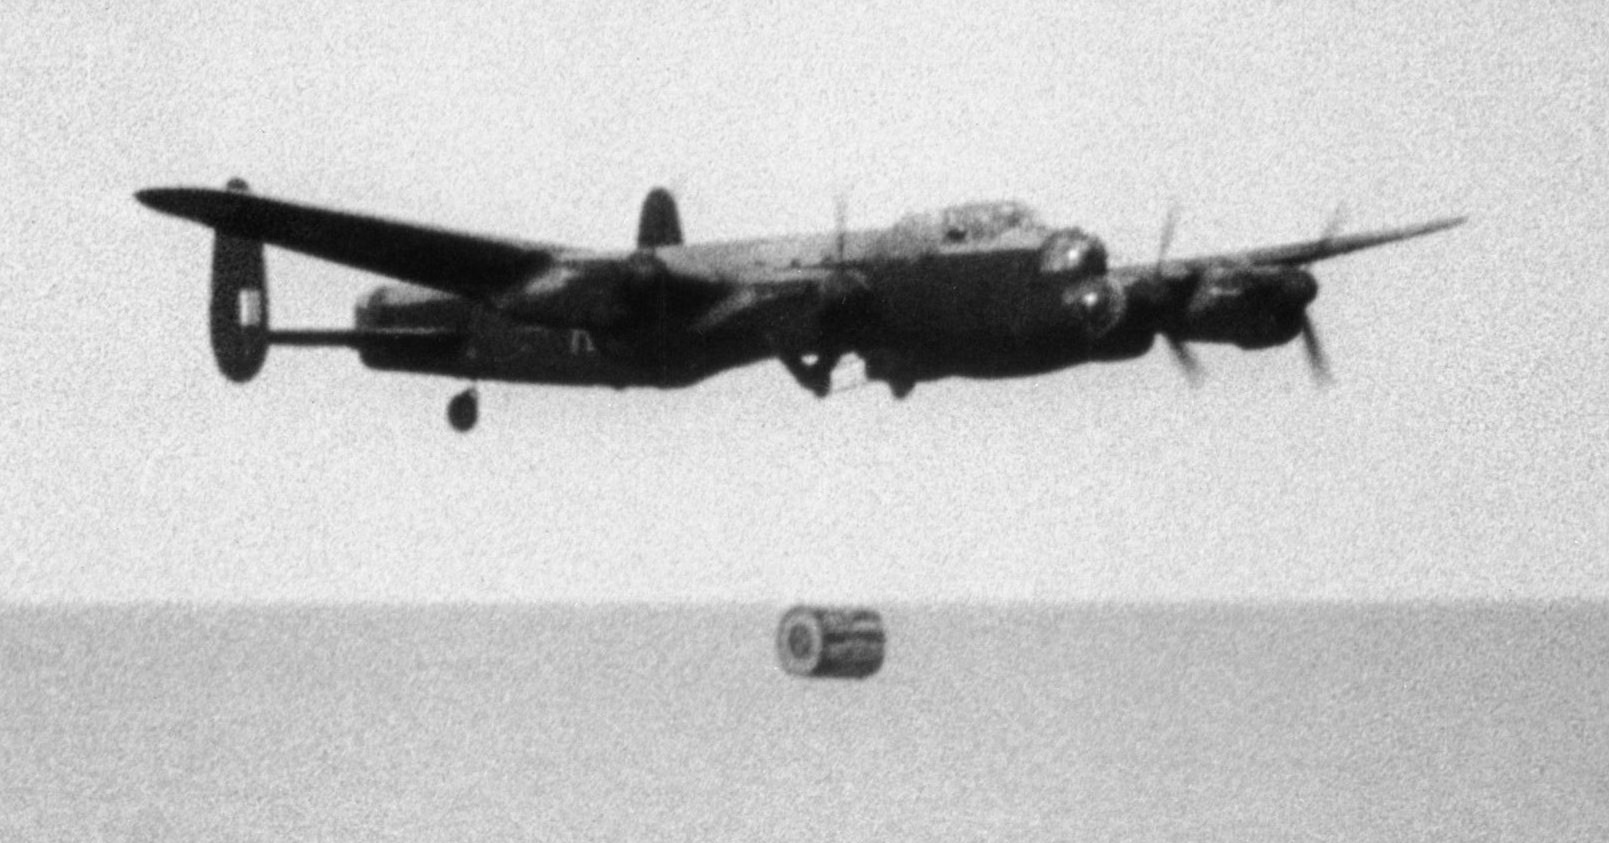 An Avro Lancaster B.III Special drops an "Upkeep" bomb during tests, April 1943. (Imperial War Museum)